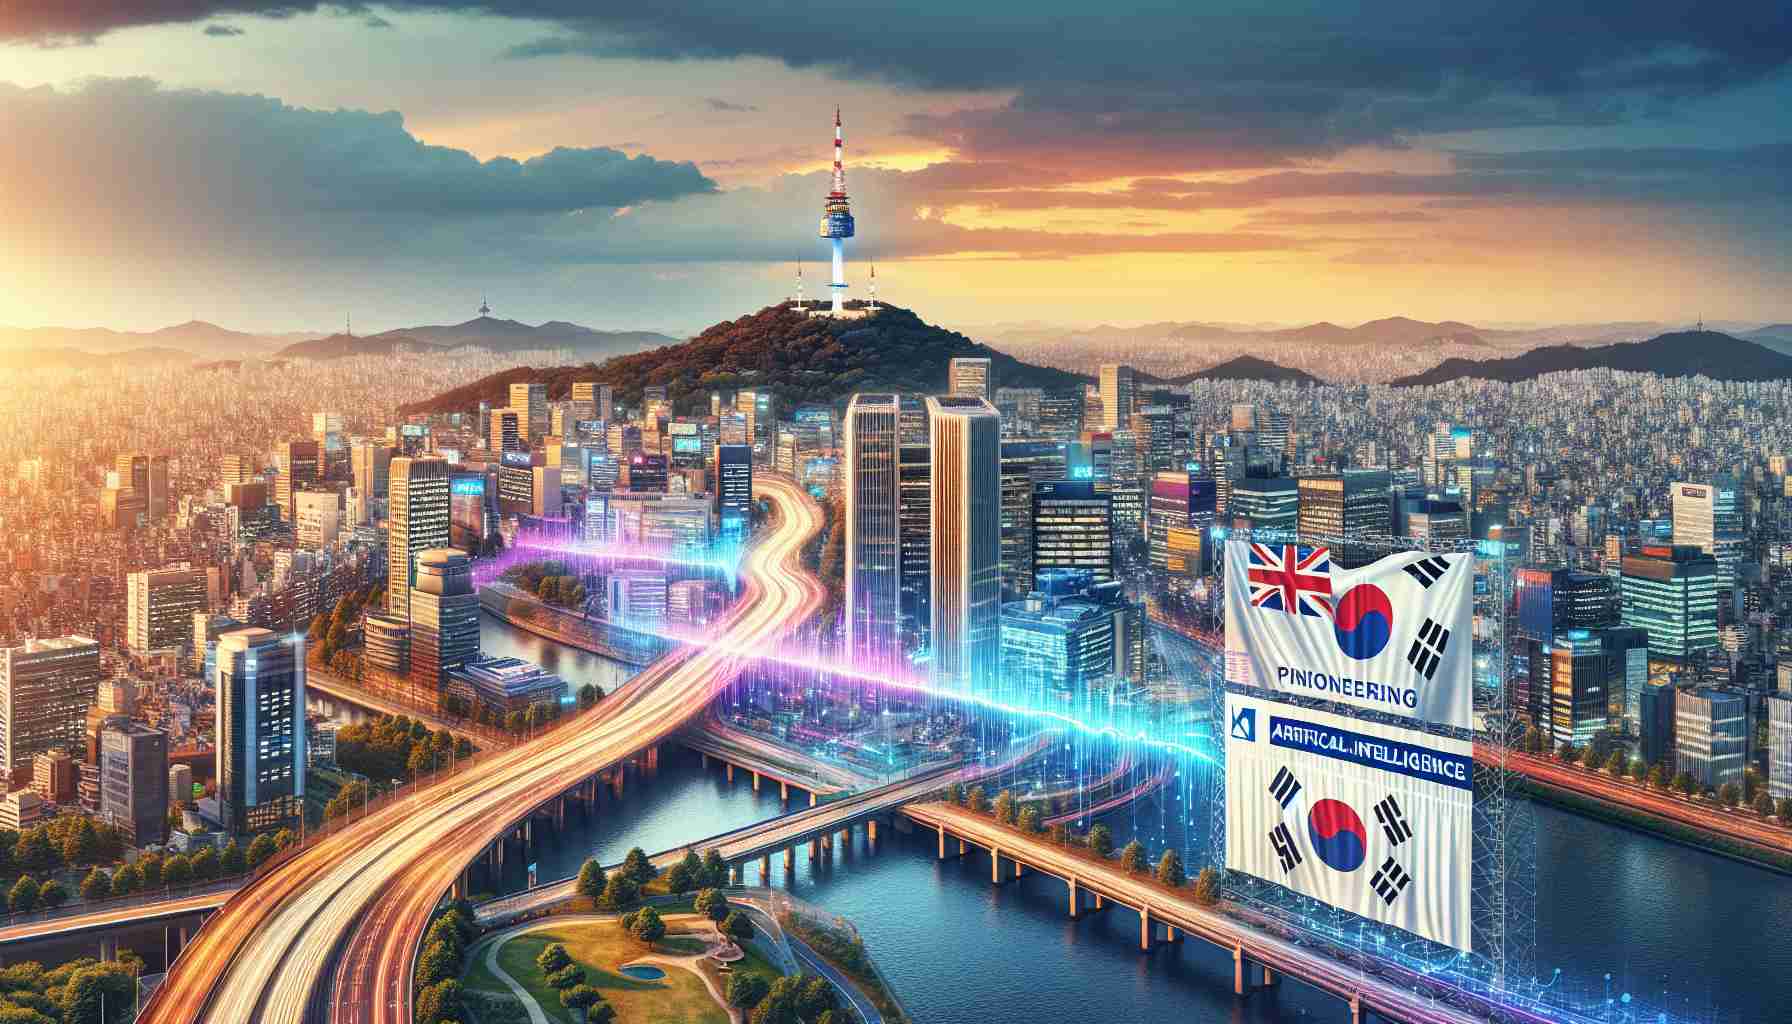 Seoul to Host Pioneering Artificial Intelligence Summit with UK Partnership